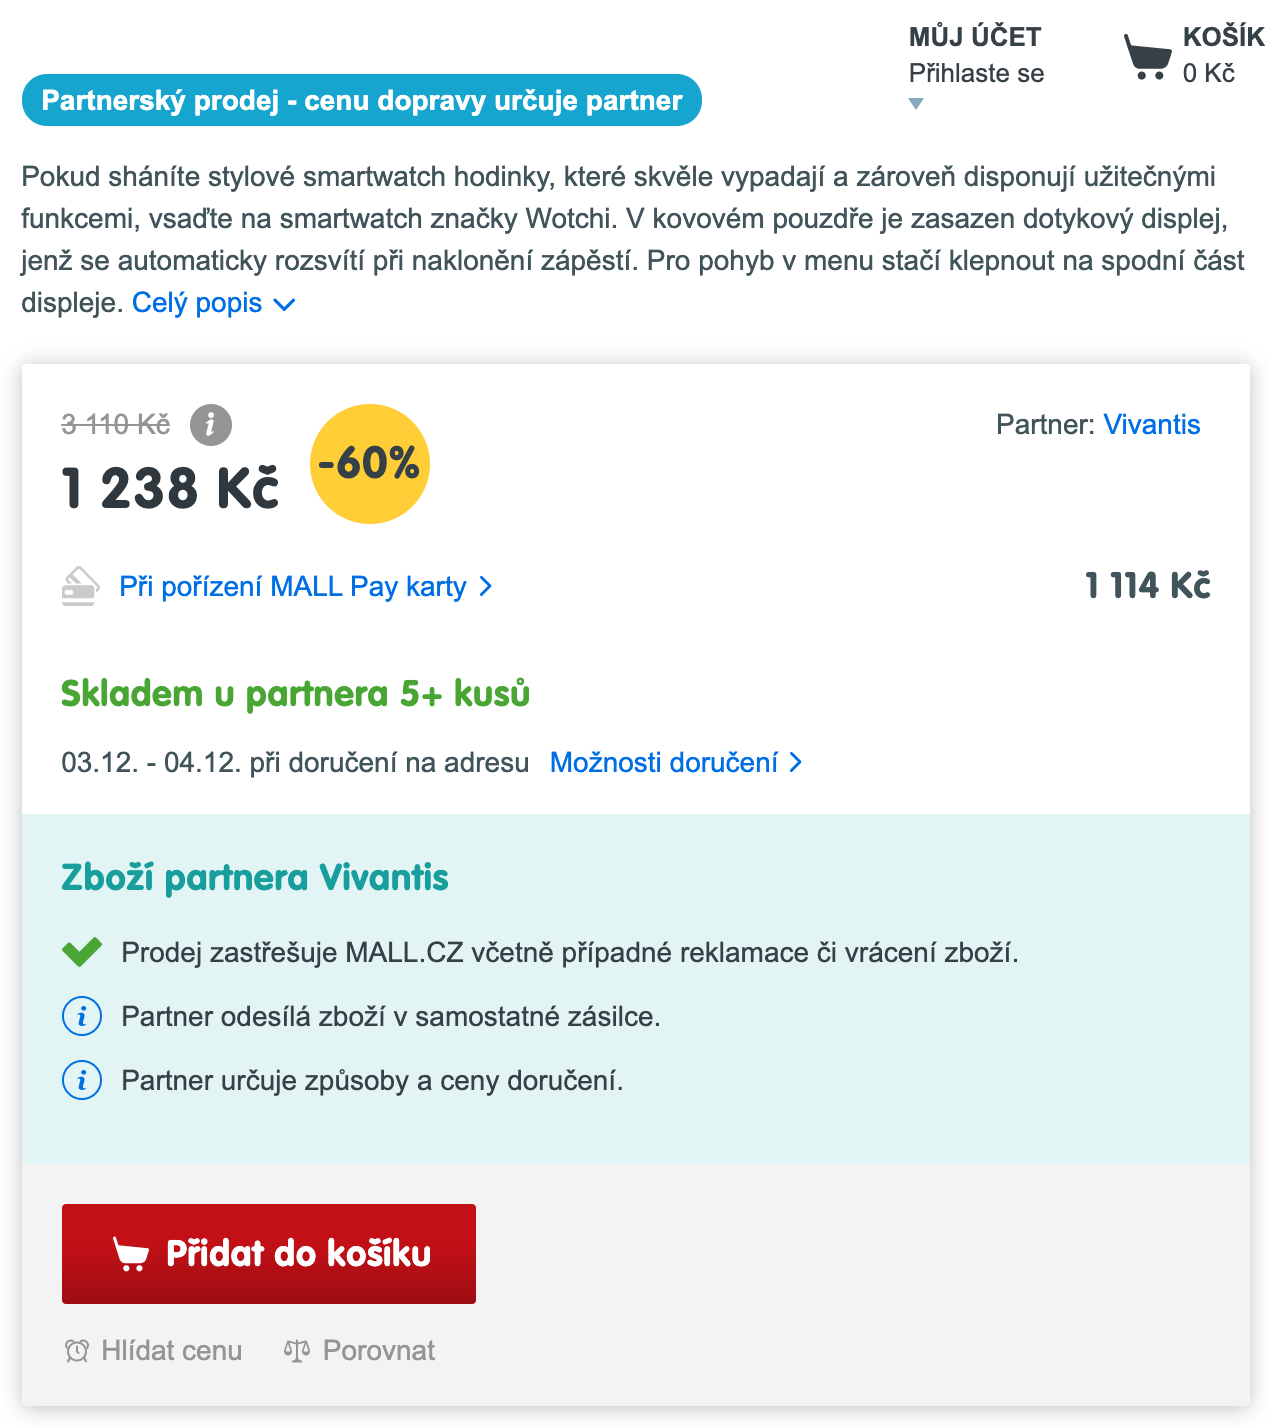 screenshot of a product on sale at mall.cz from CZK 3,110 to CZK 1,238 marked as a partner sale